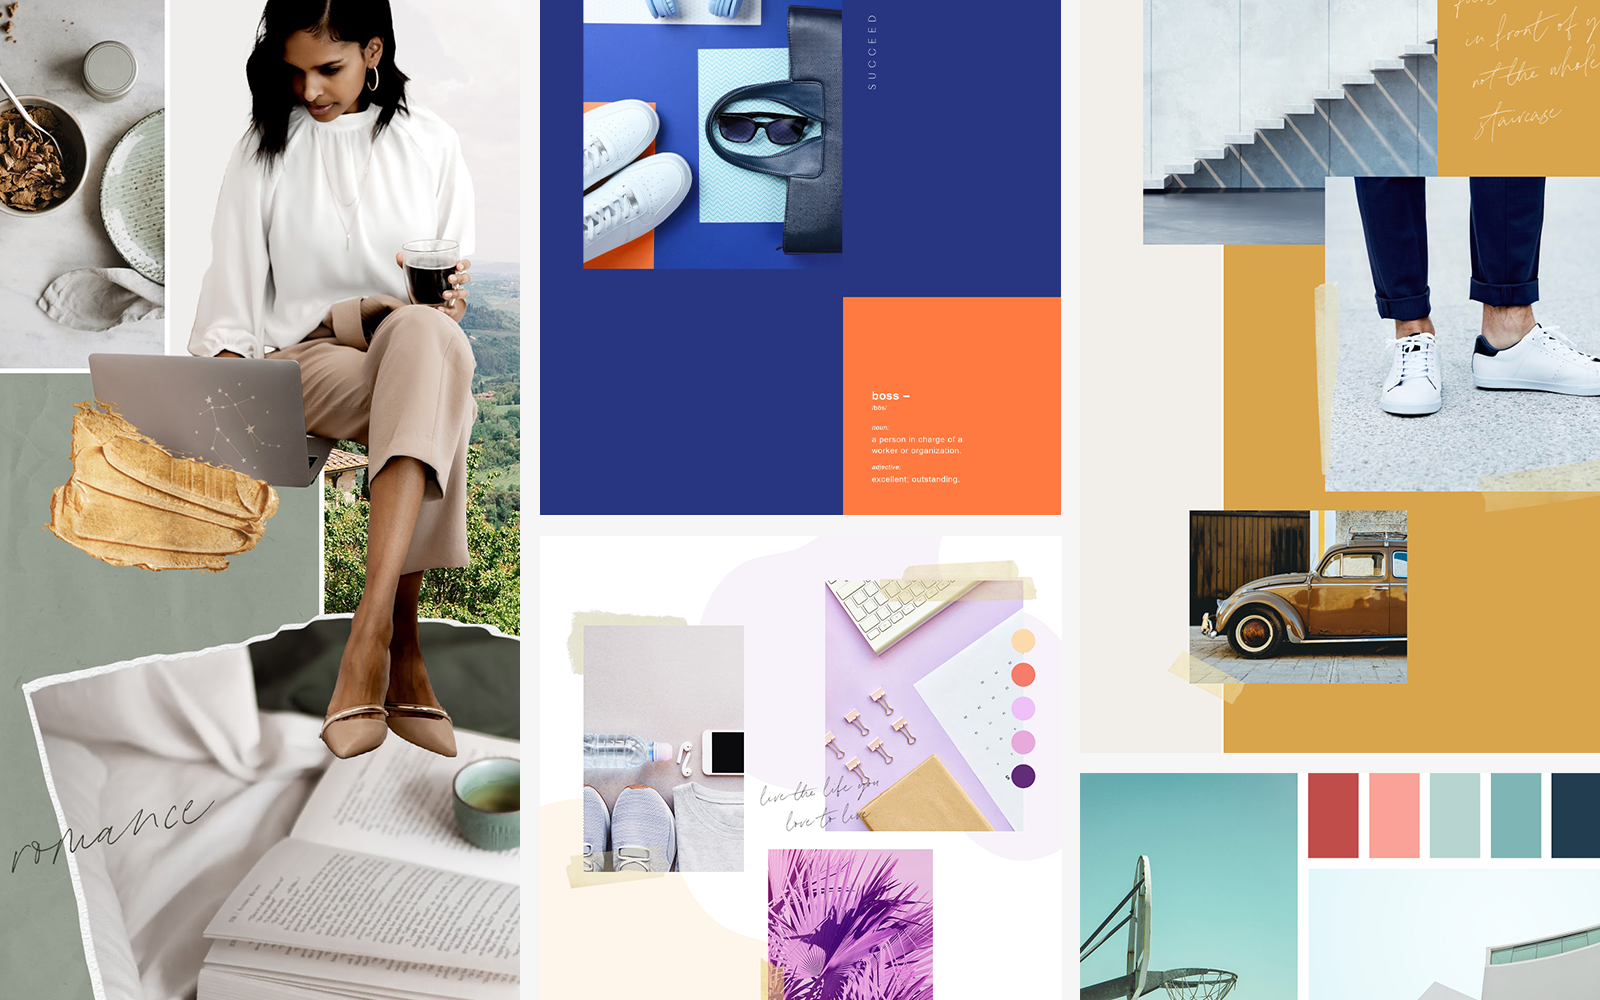 How to Make a Digital Vision Board